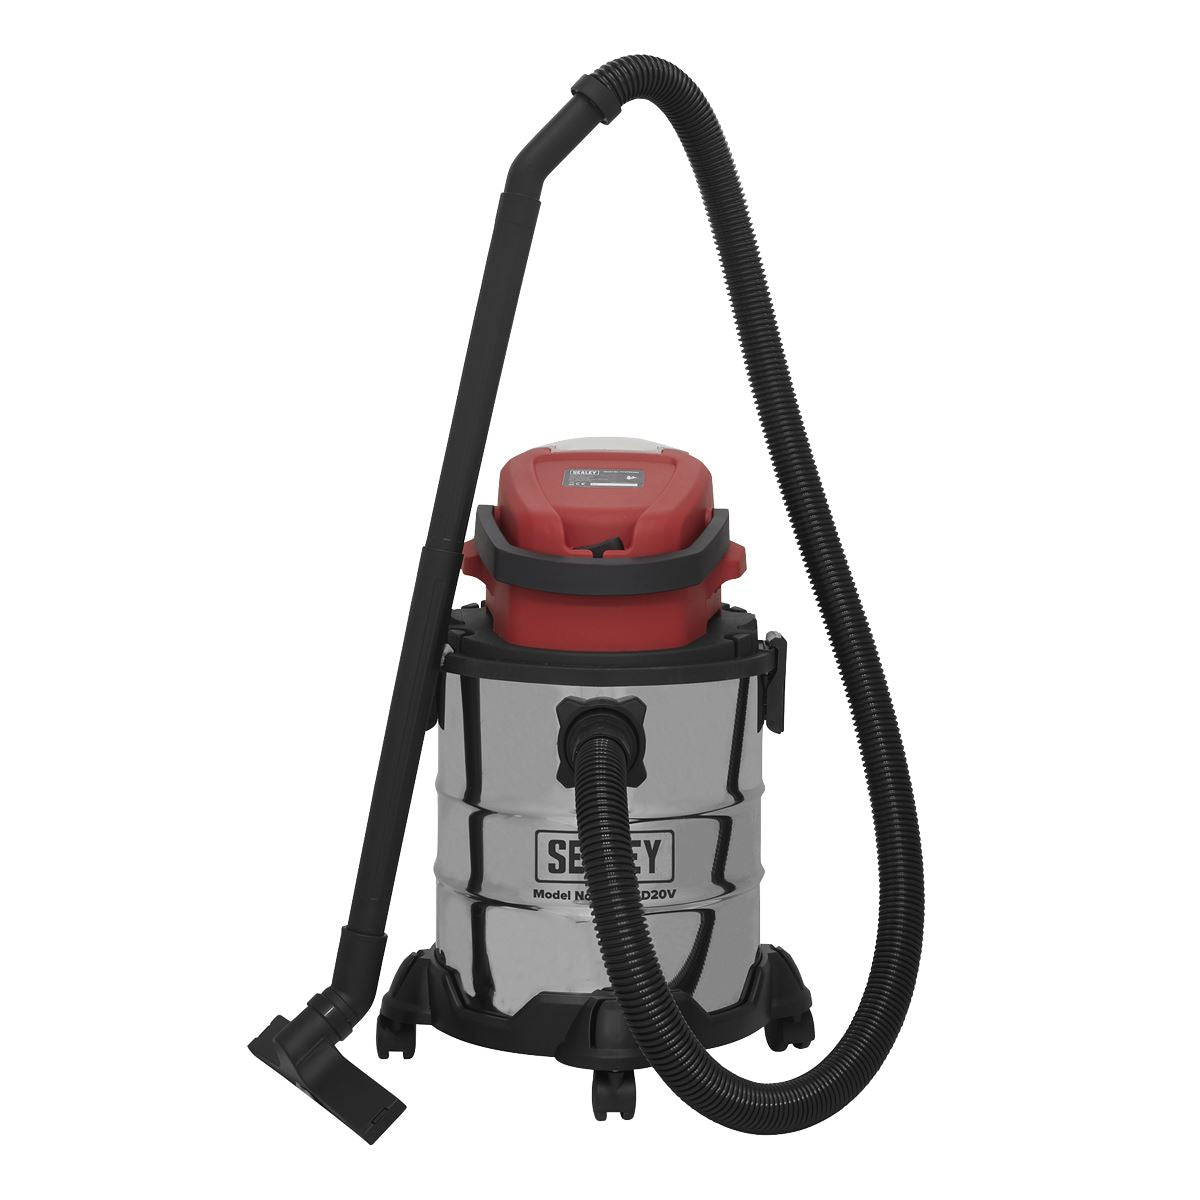 Sealey 20V Cordless 20L Wet and Dry Vacuum Cleaner Body Only